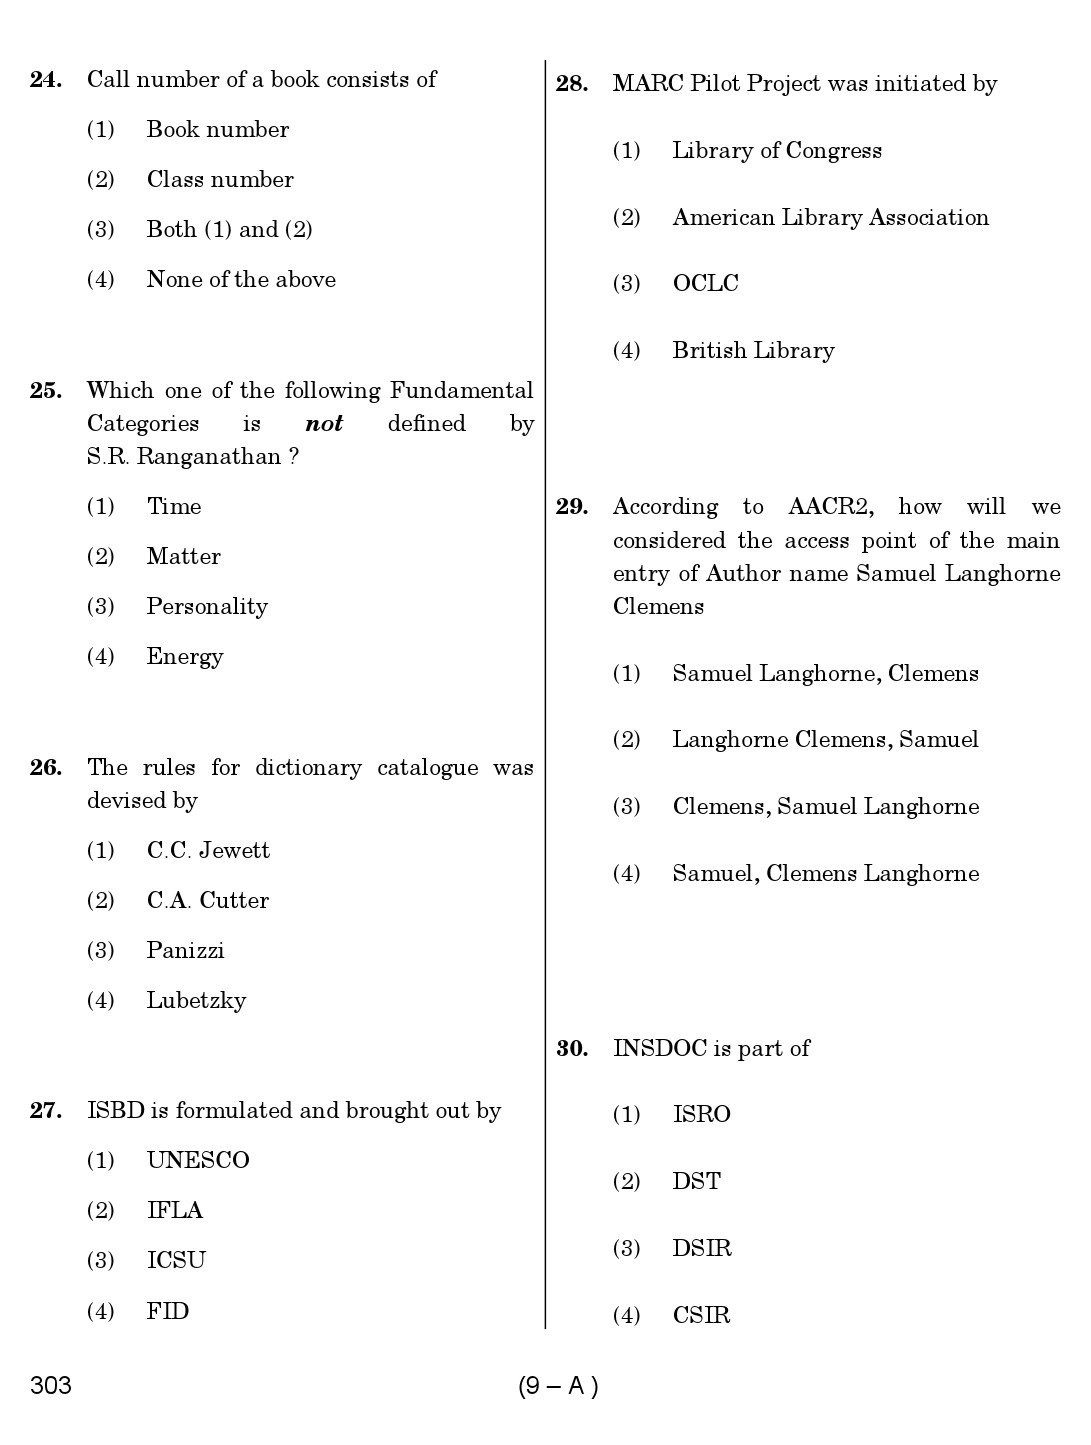 Karnataka PSC 303 Specific Paper II Librarian Exam Sample Question Paper 9